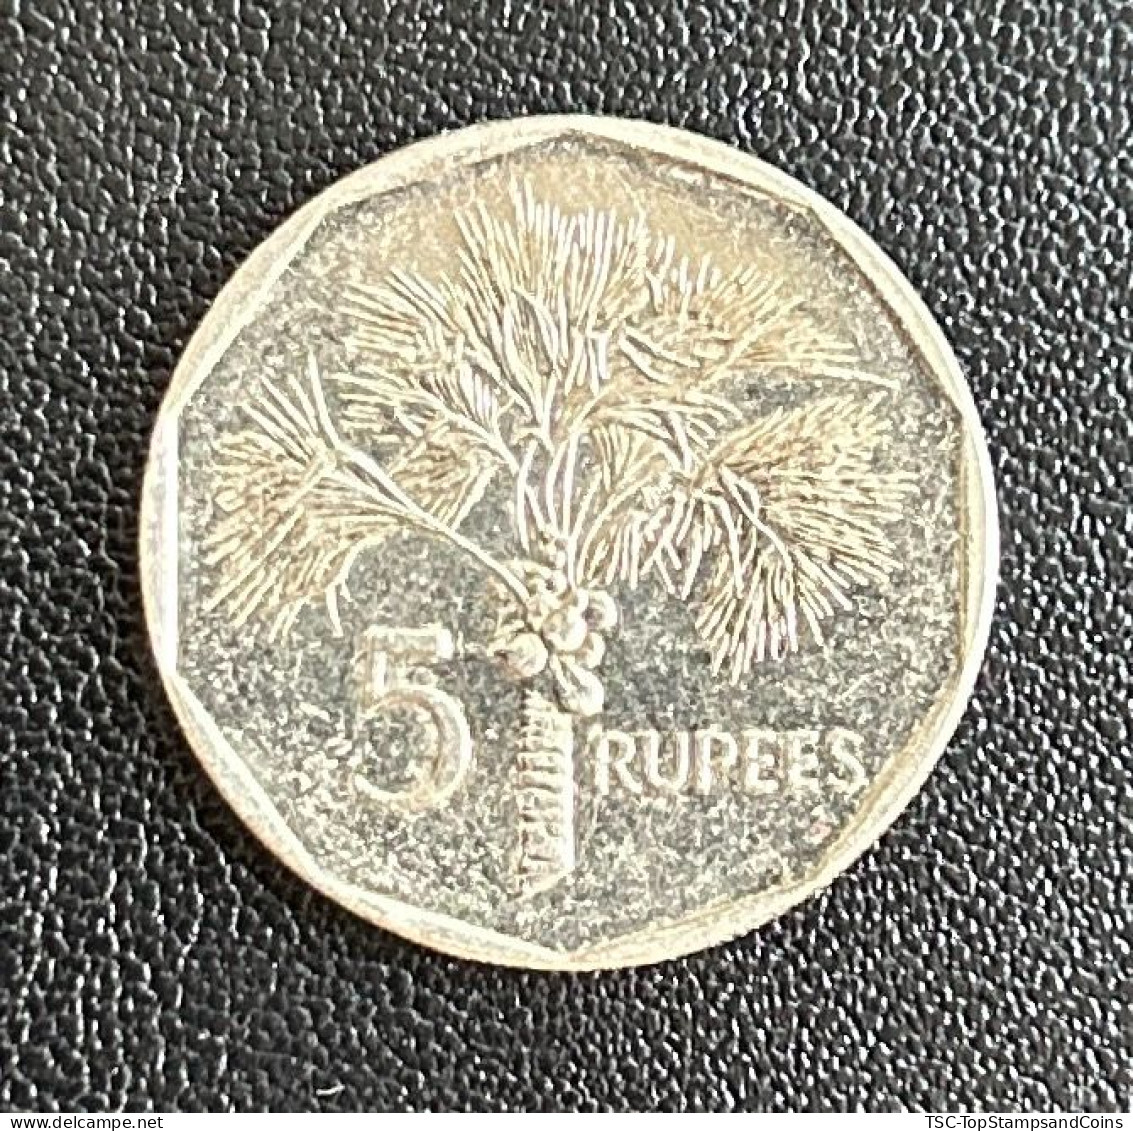 $$SEY500 - Coat Of Arms / Palm Tree - 5 Rupees Magnetic Coin - Seychelles - 2010 - Seychelles